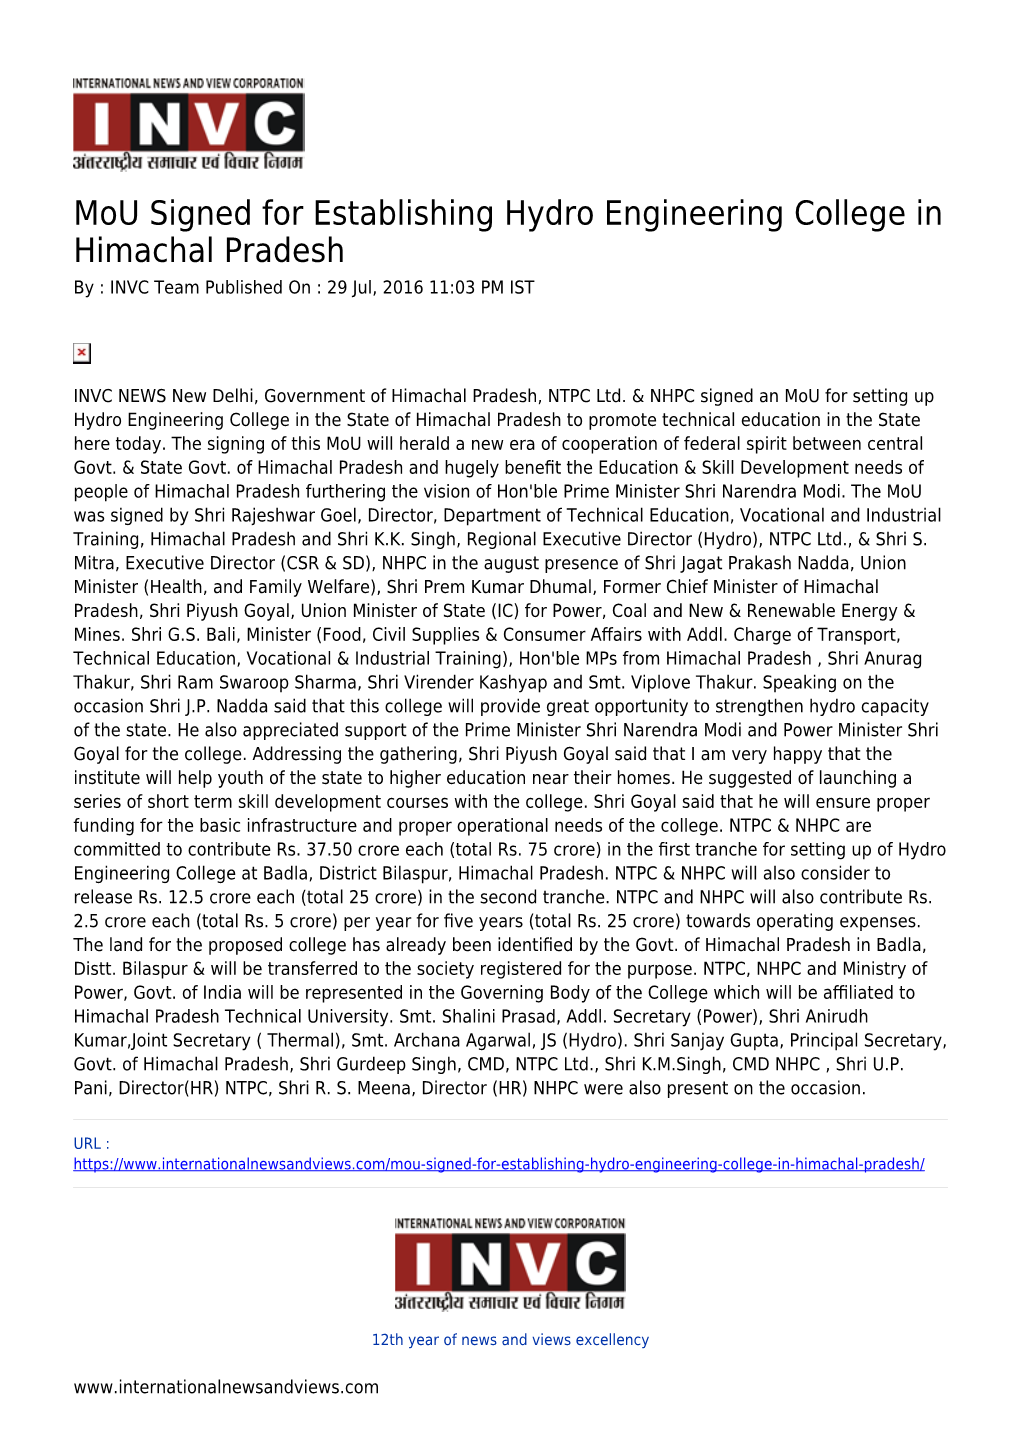 Mou Signed for Establishing Hydro Engineering College in Himachal Pradesh by : INVC Team Published on : 29 Jul, 2016 11:03 PM IST